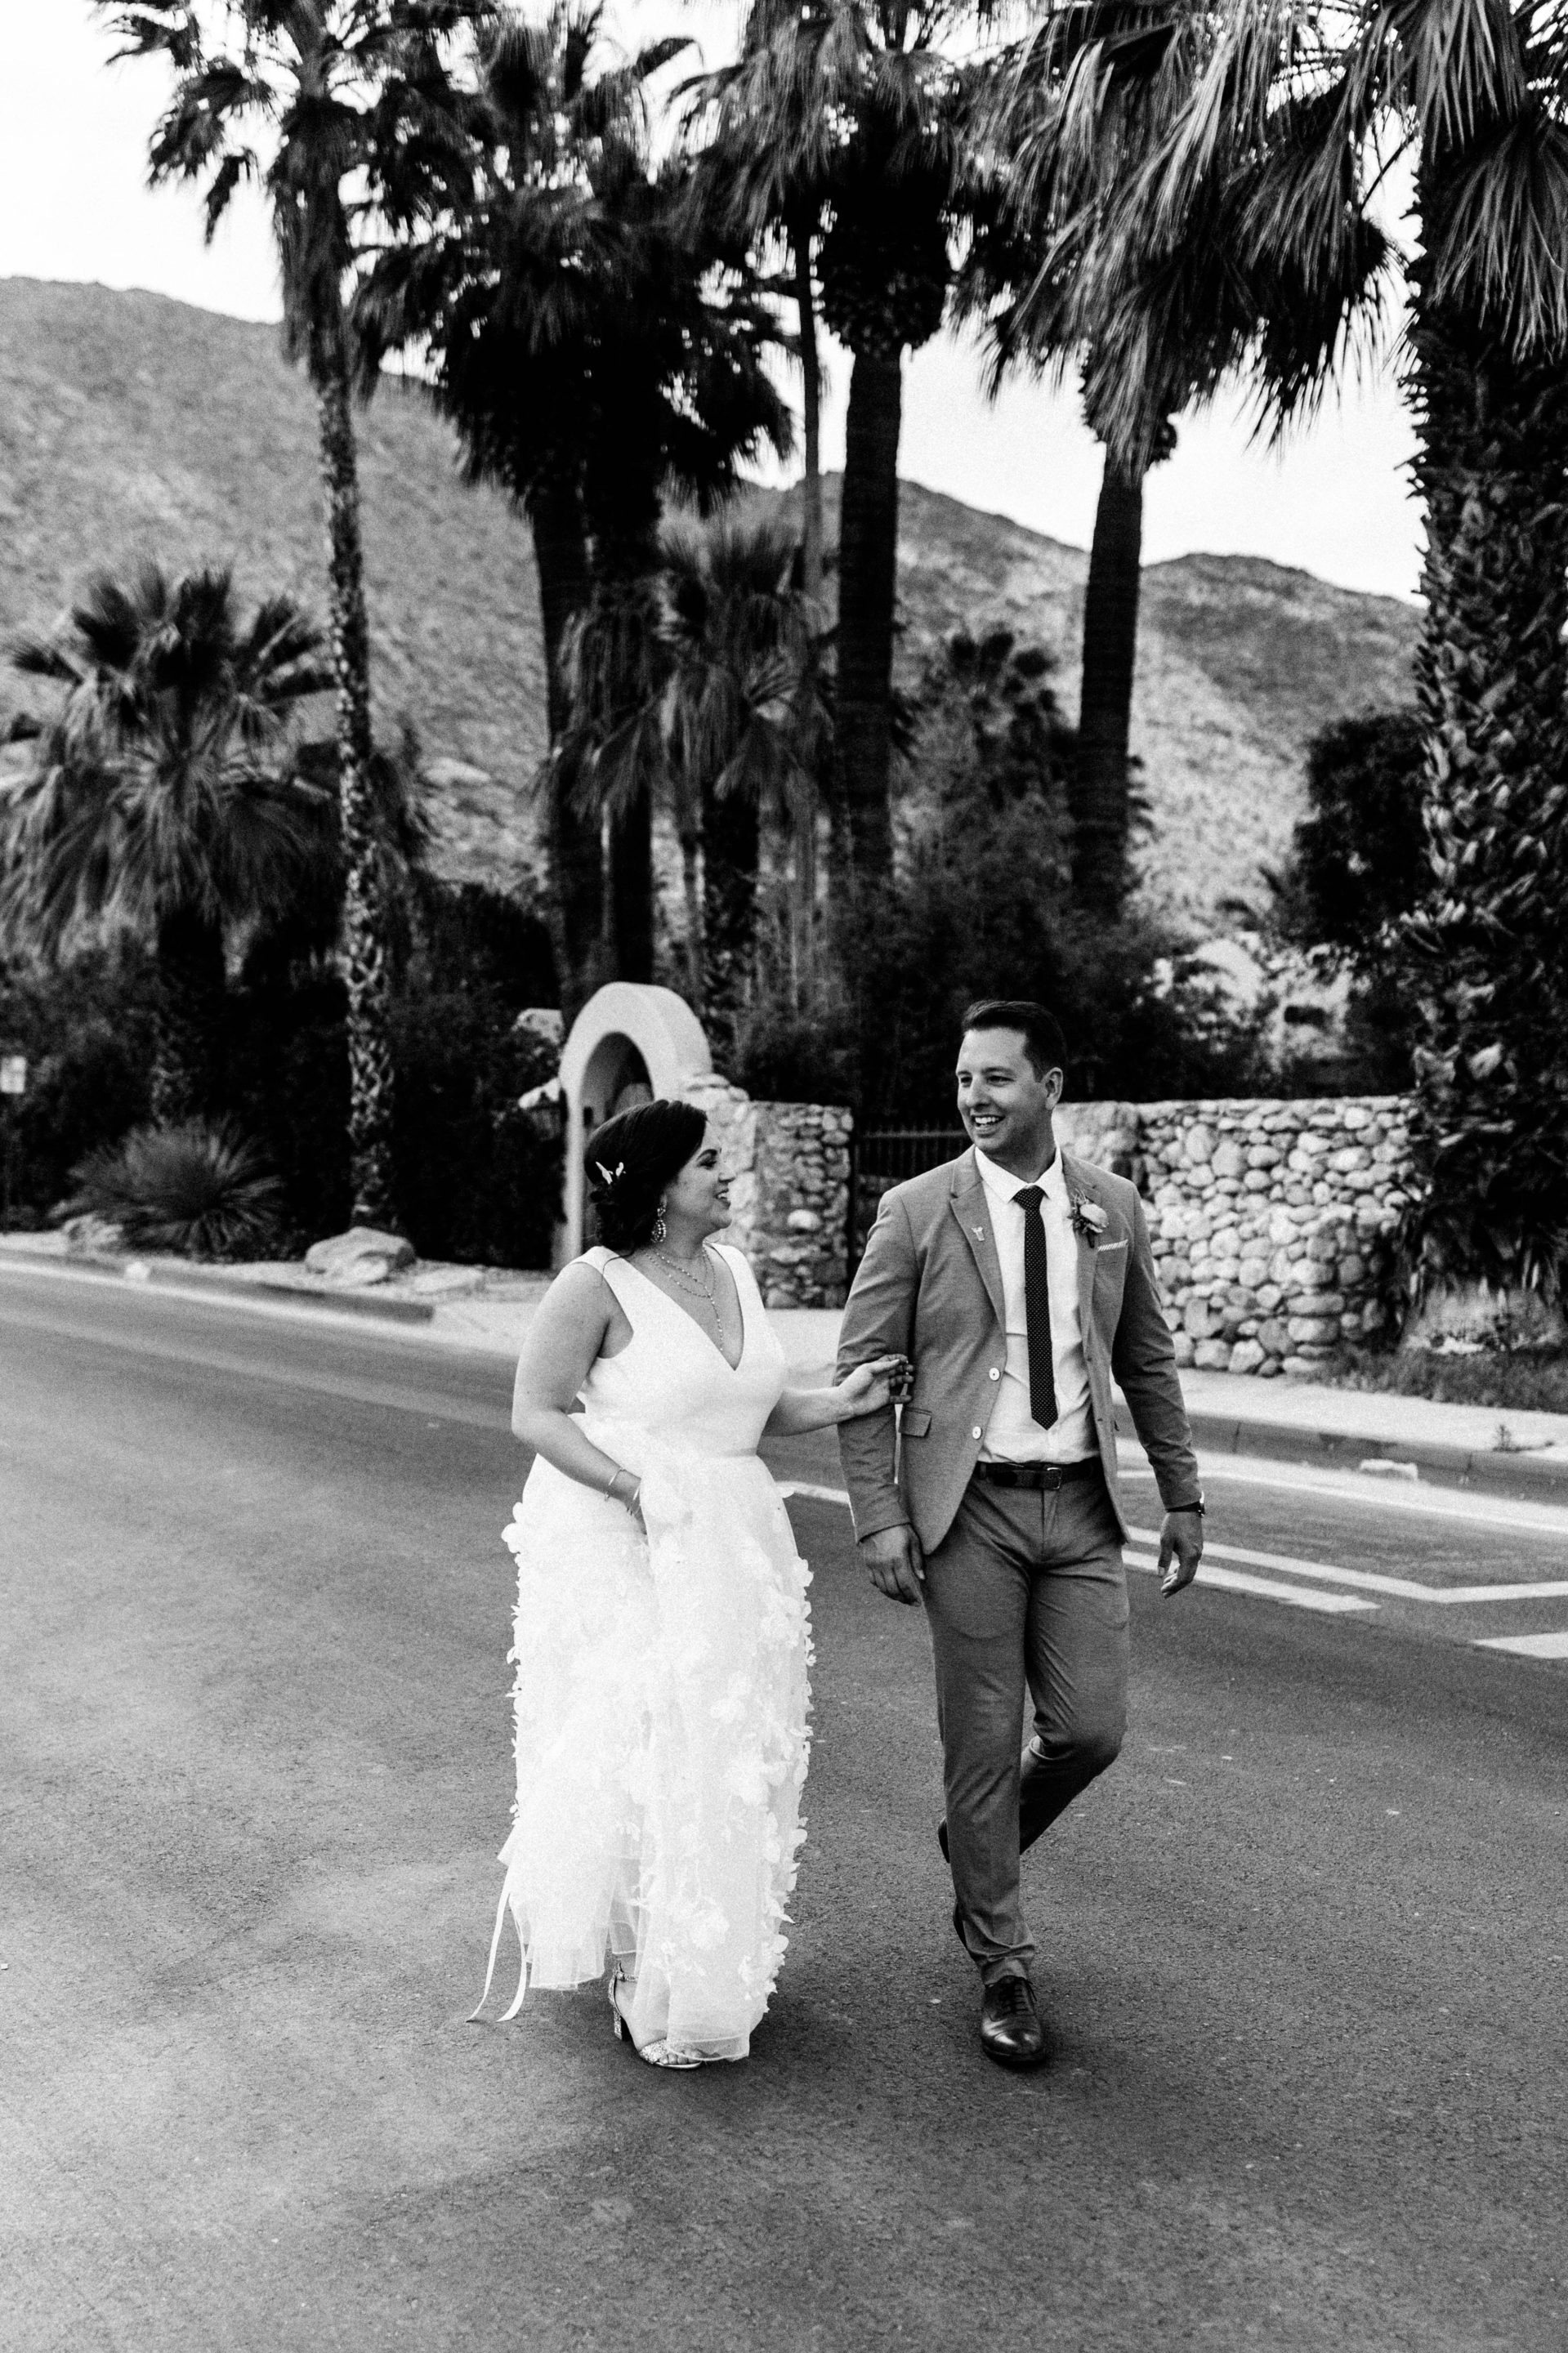 Palm Springs Wedding Photoshoot | A Life Well Consumed